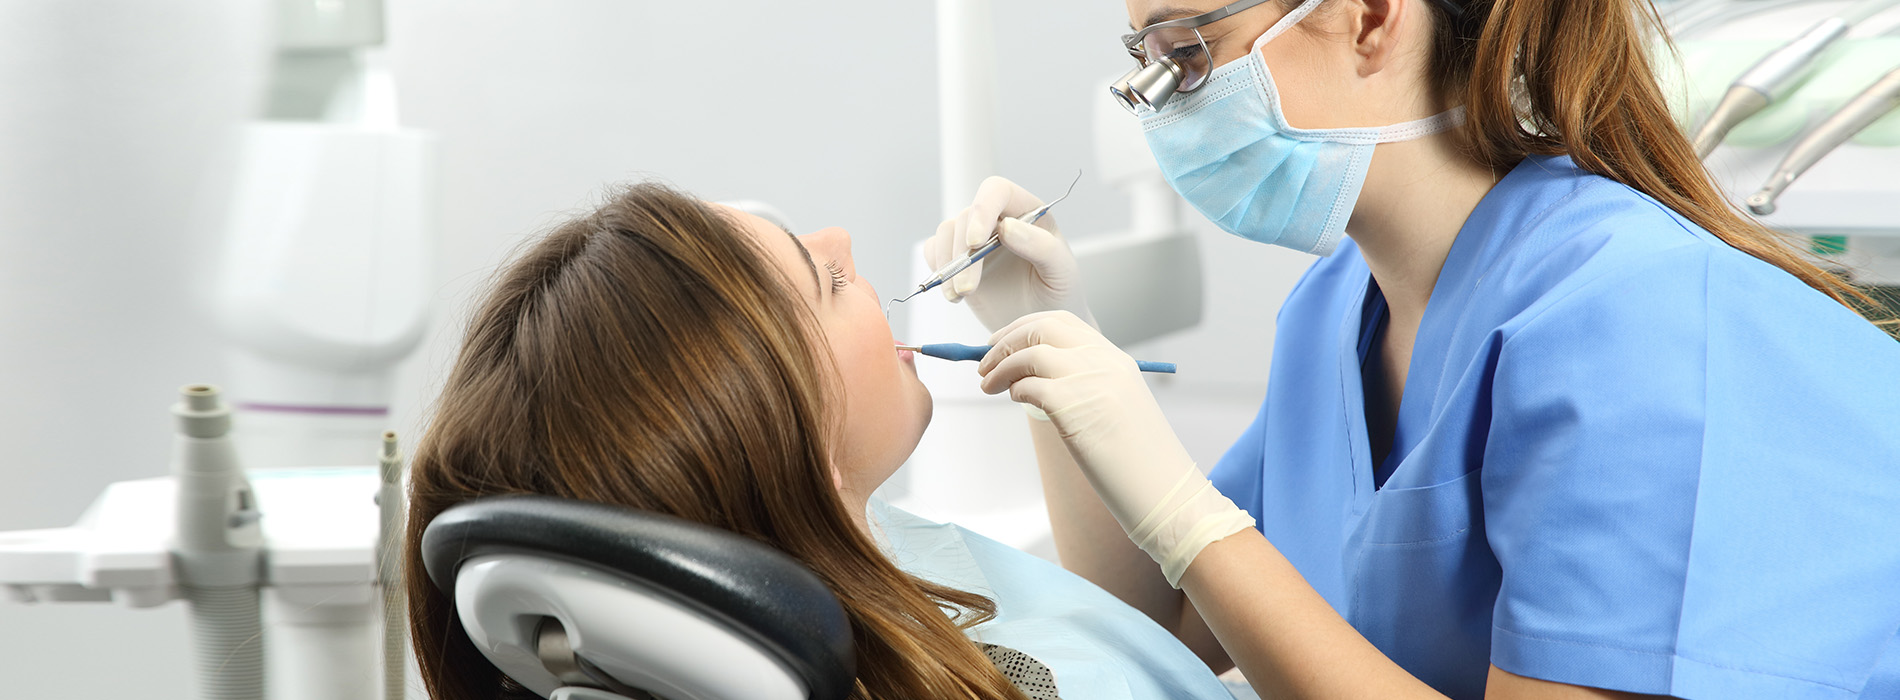 A dental hygienist is attending to a patient in a dental office, with the patient seated in an examination chair and receiving care.